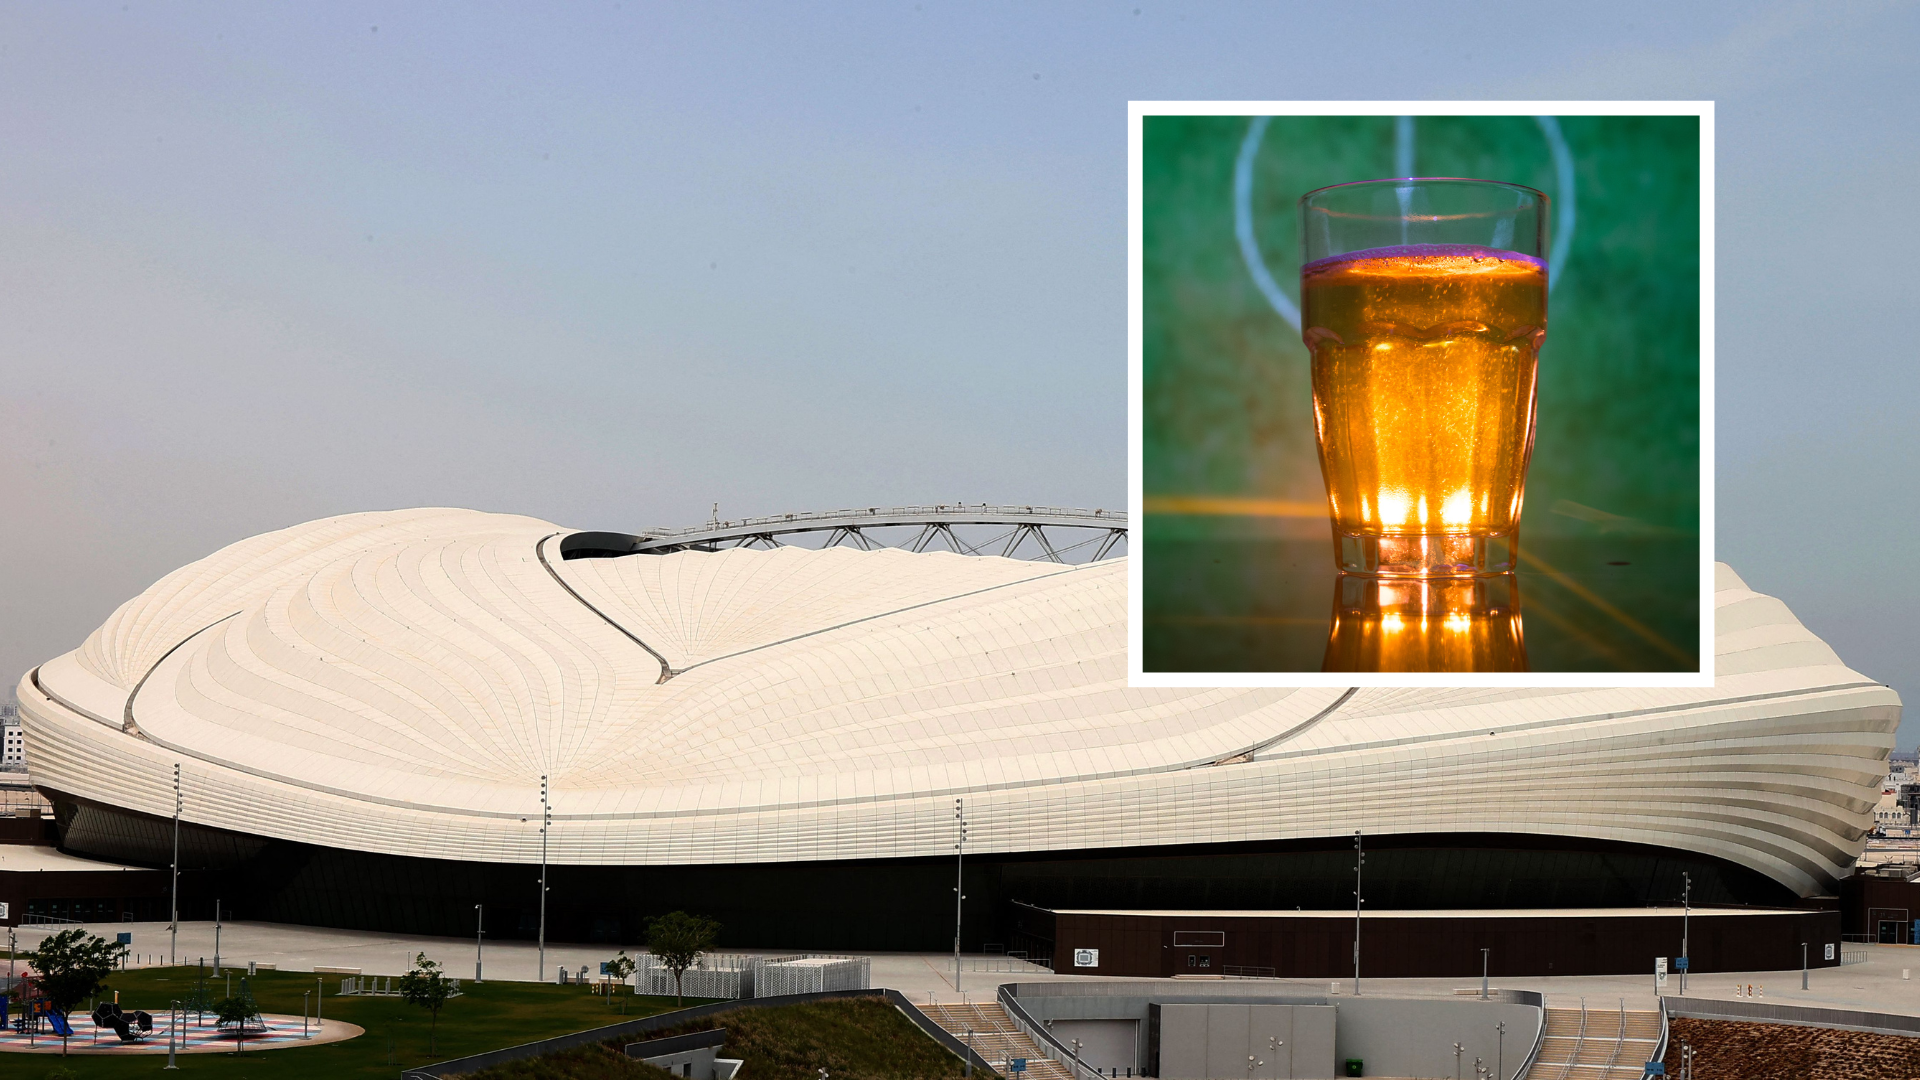 Budweiser Says 'This Is Awkward' After Qatar Bans Beer in World Cup Stadiums